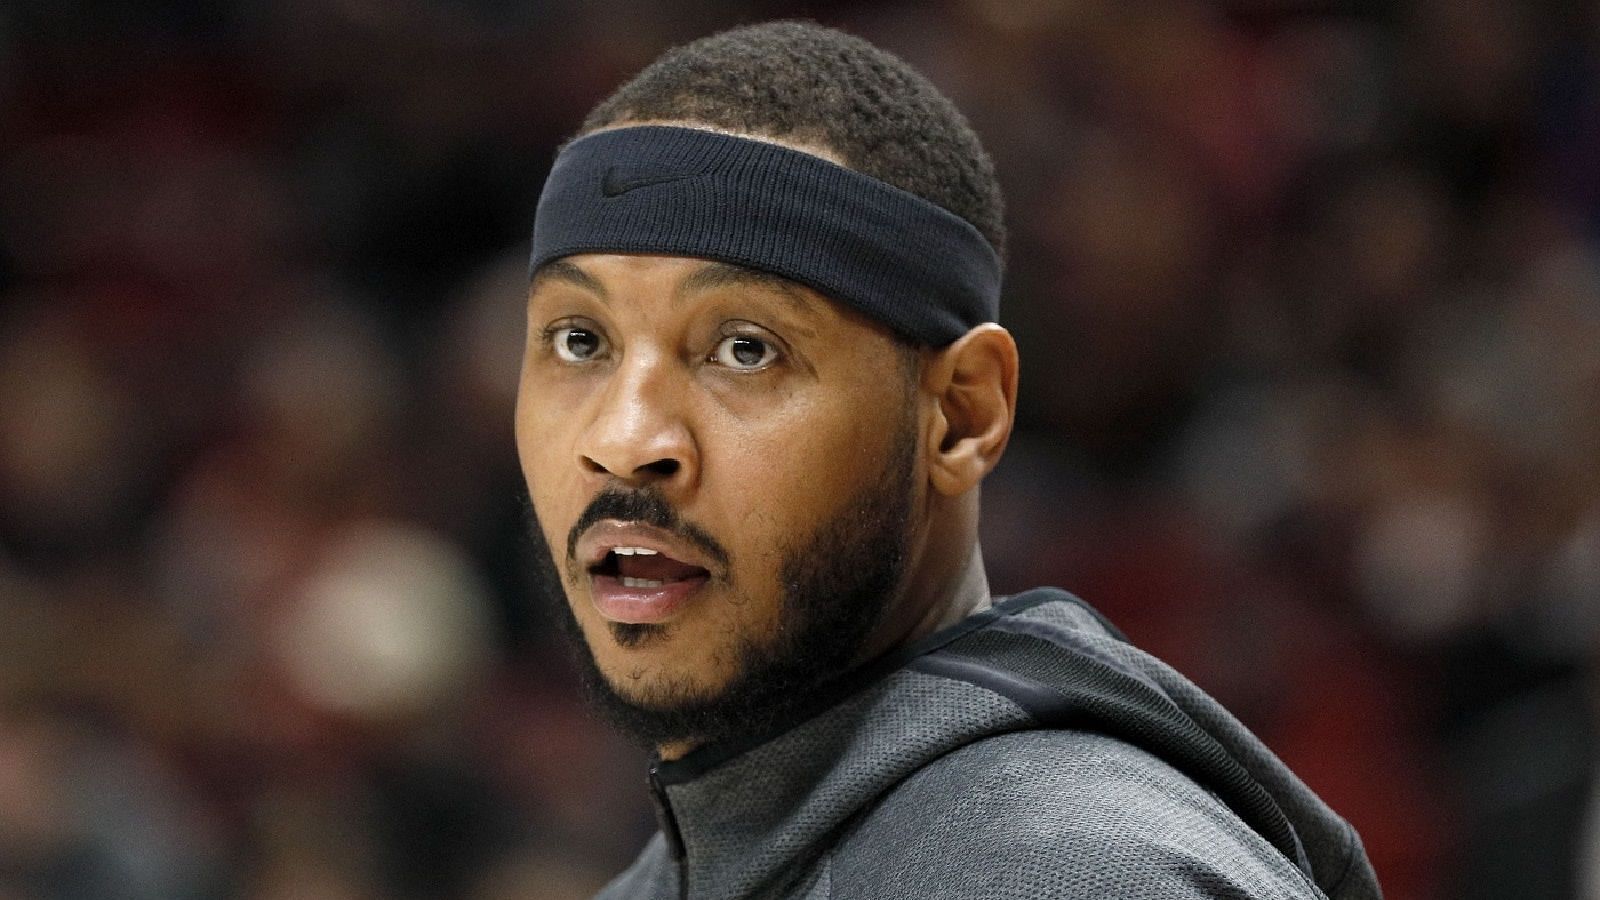 NBA veteran and current free agent Carmelo Anthony